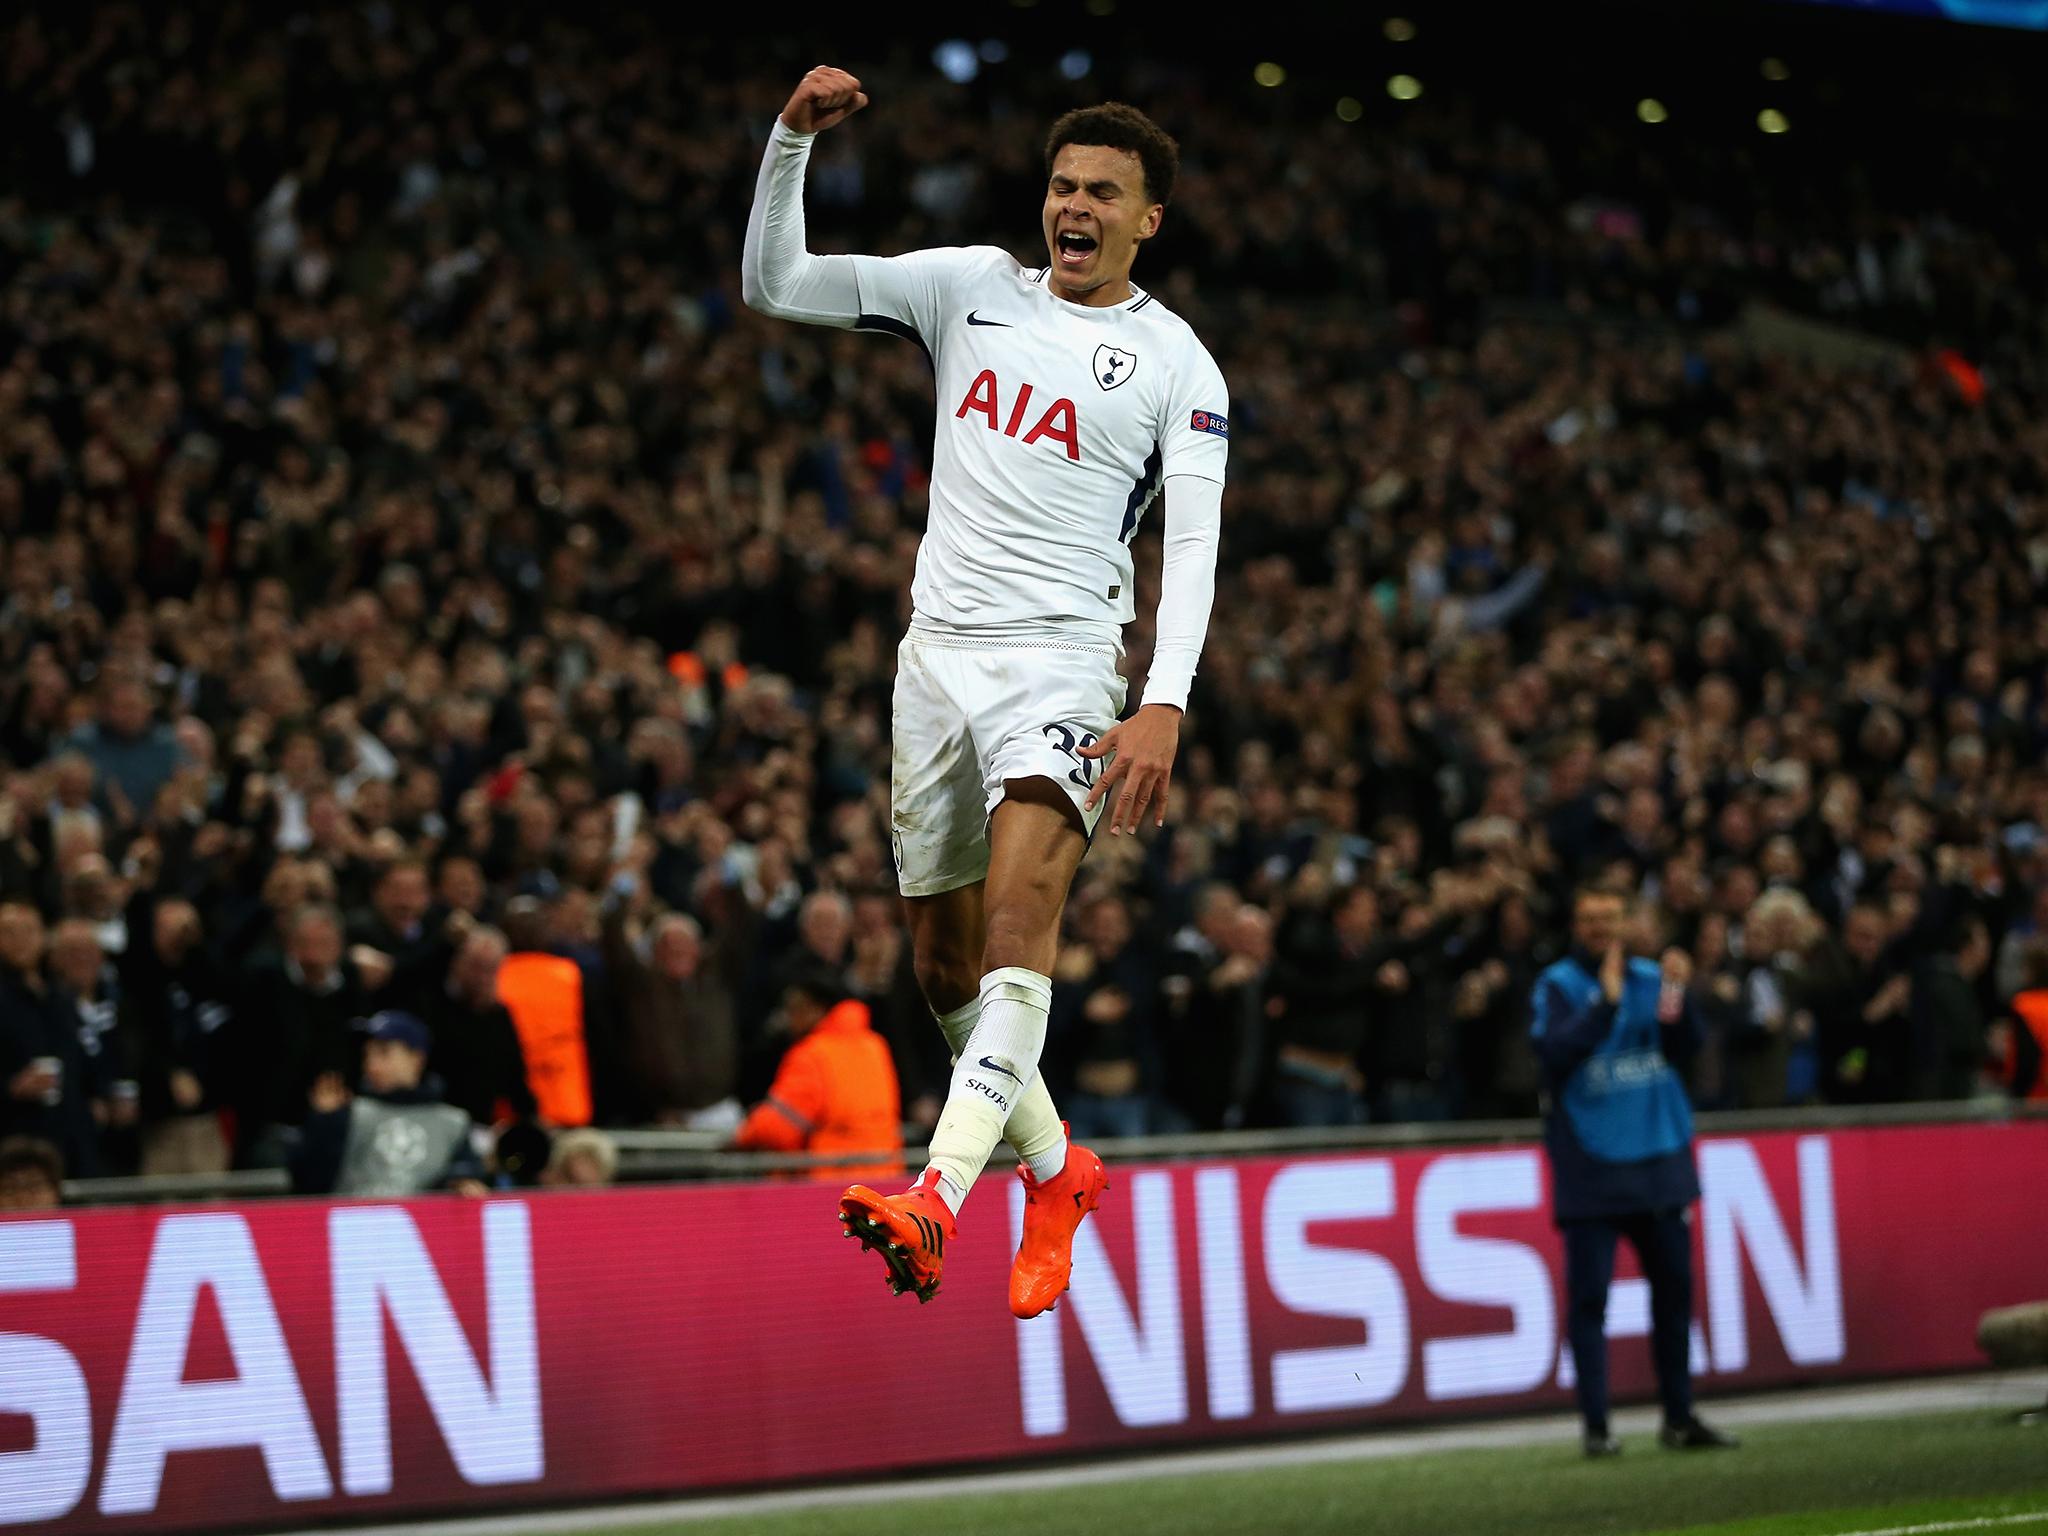 Tottenham showed how far they have come in beating Real Madrid